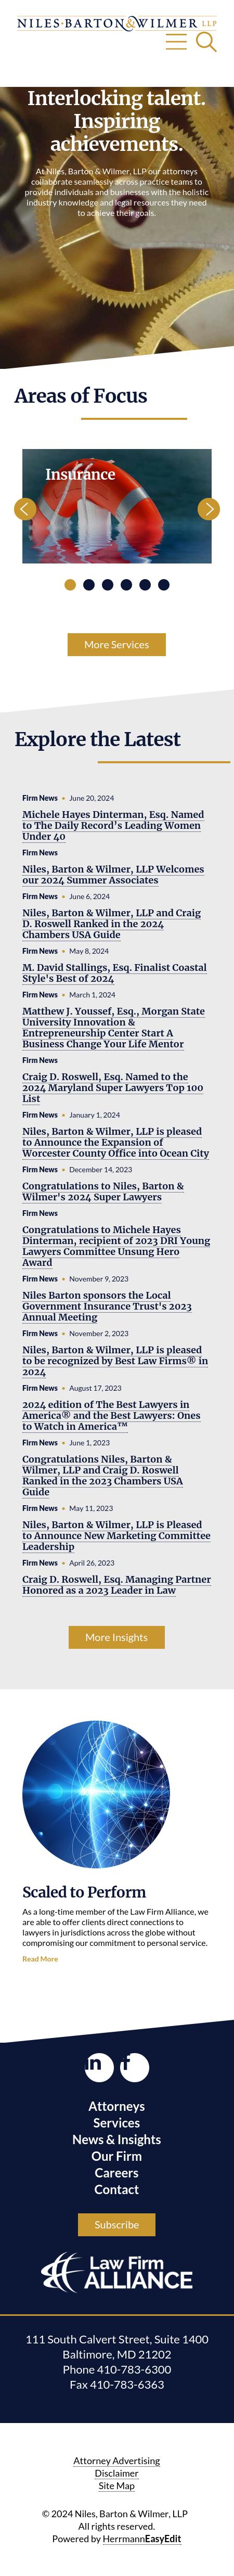 Niles, Barton & Wilmer, LLP - Baltimore MD Lawyers